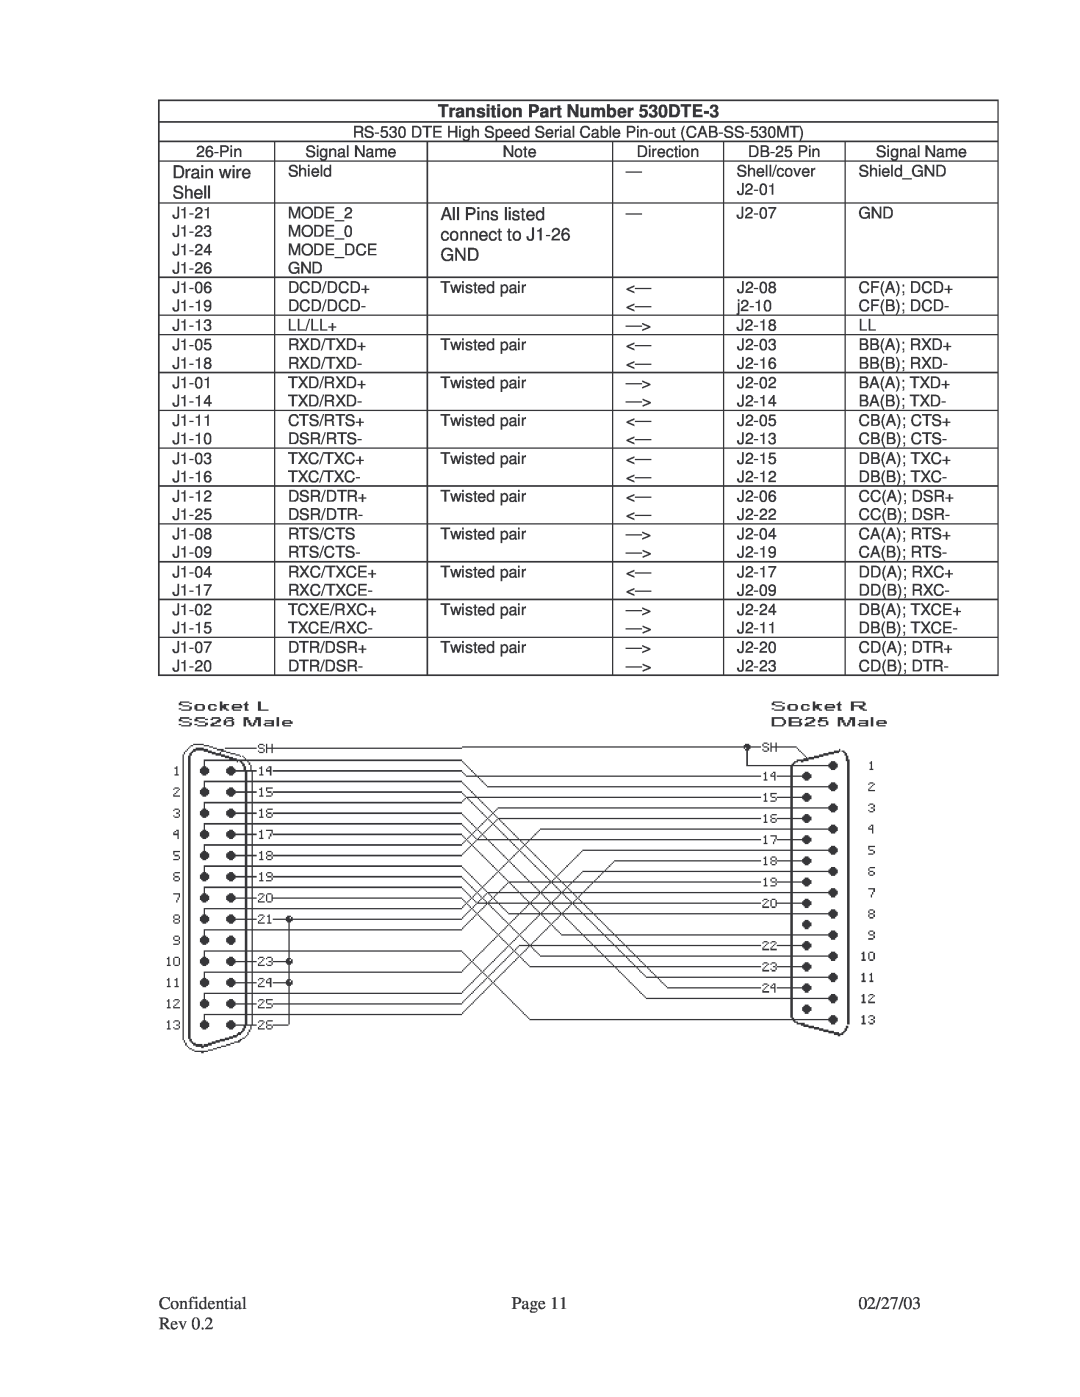 Transition Networks X.21, V.35, RS-449, RS-530, CPSVT26XX, RS-232 specifications Transition Part Number 530DTE-3 